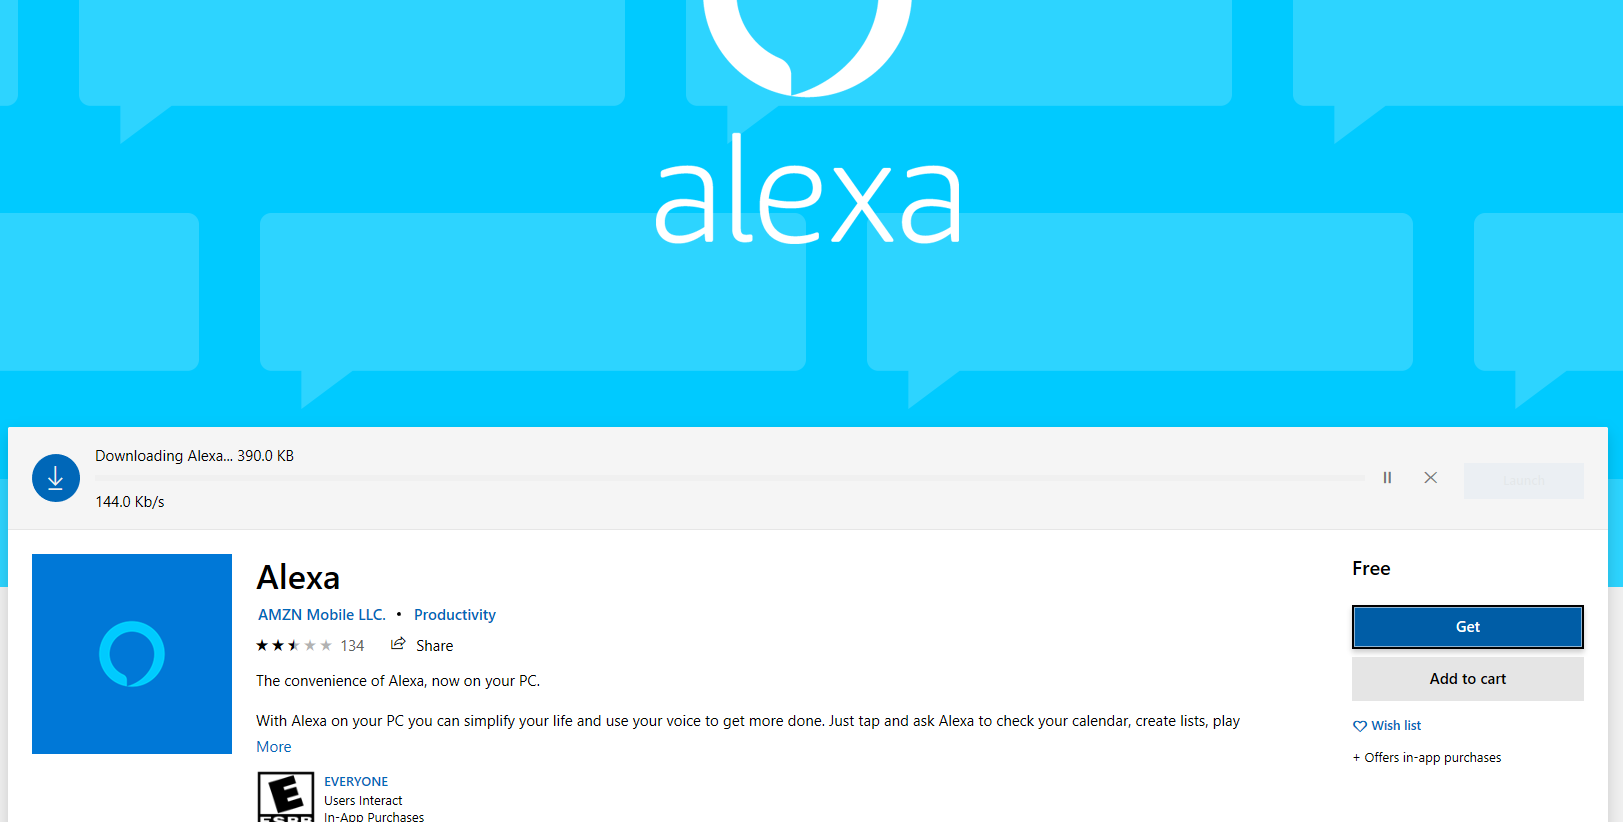 IS A WINDOWS 10 VERSION OF ALEXA AVAILABLE FOR PC/LAPTOP? 61e05d6d-4d0a-4027-84c6-0295a24a2ad7?upload=true.png